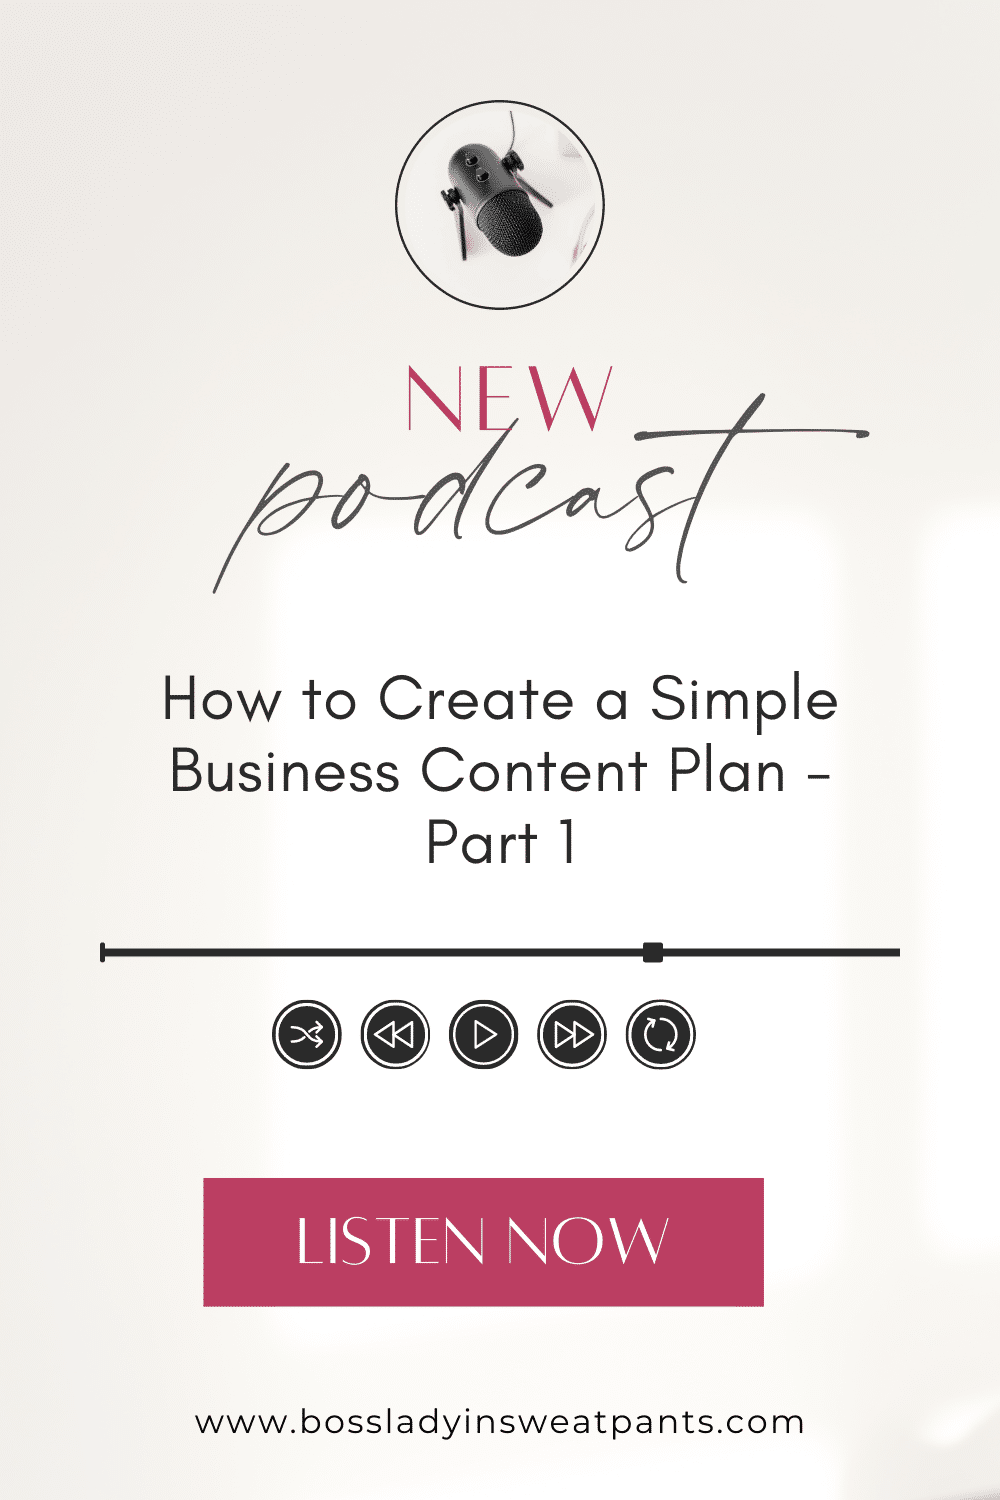 podcast graphic with text: how to create a simple business content plan - part 1